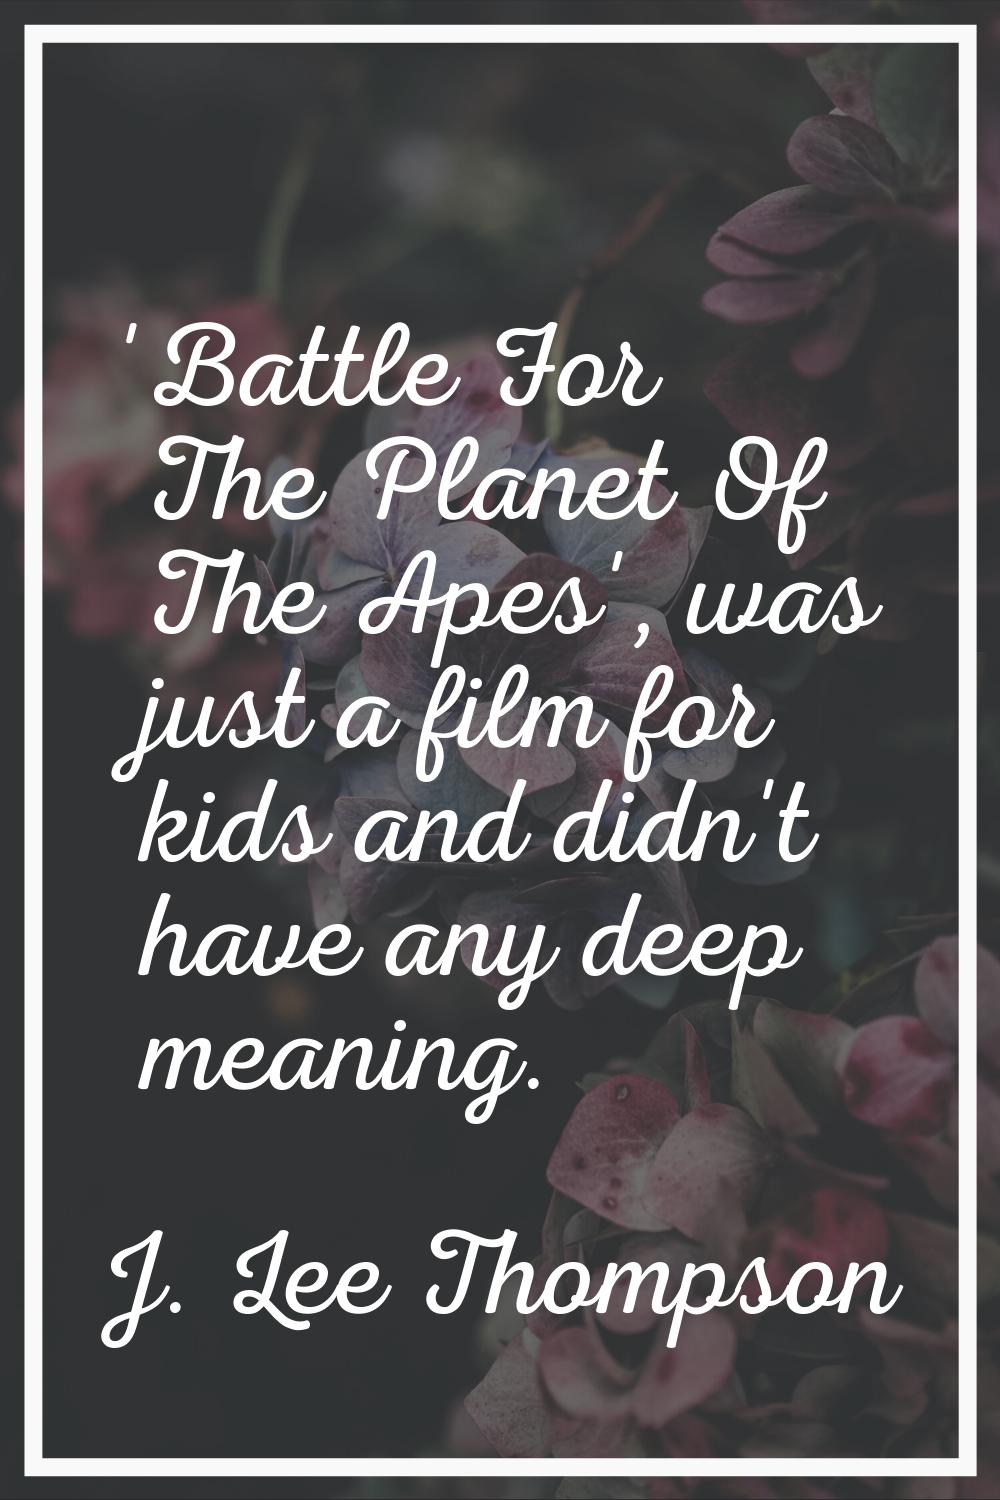 'Battle For The Planet Of The Apes', was just a film for kids and didn't have any deep meaning.